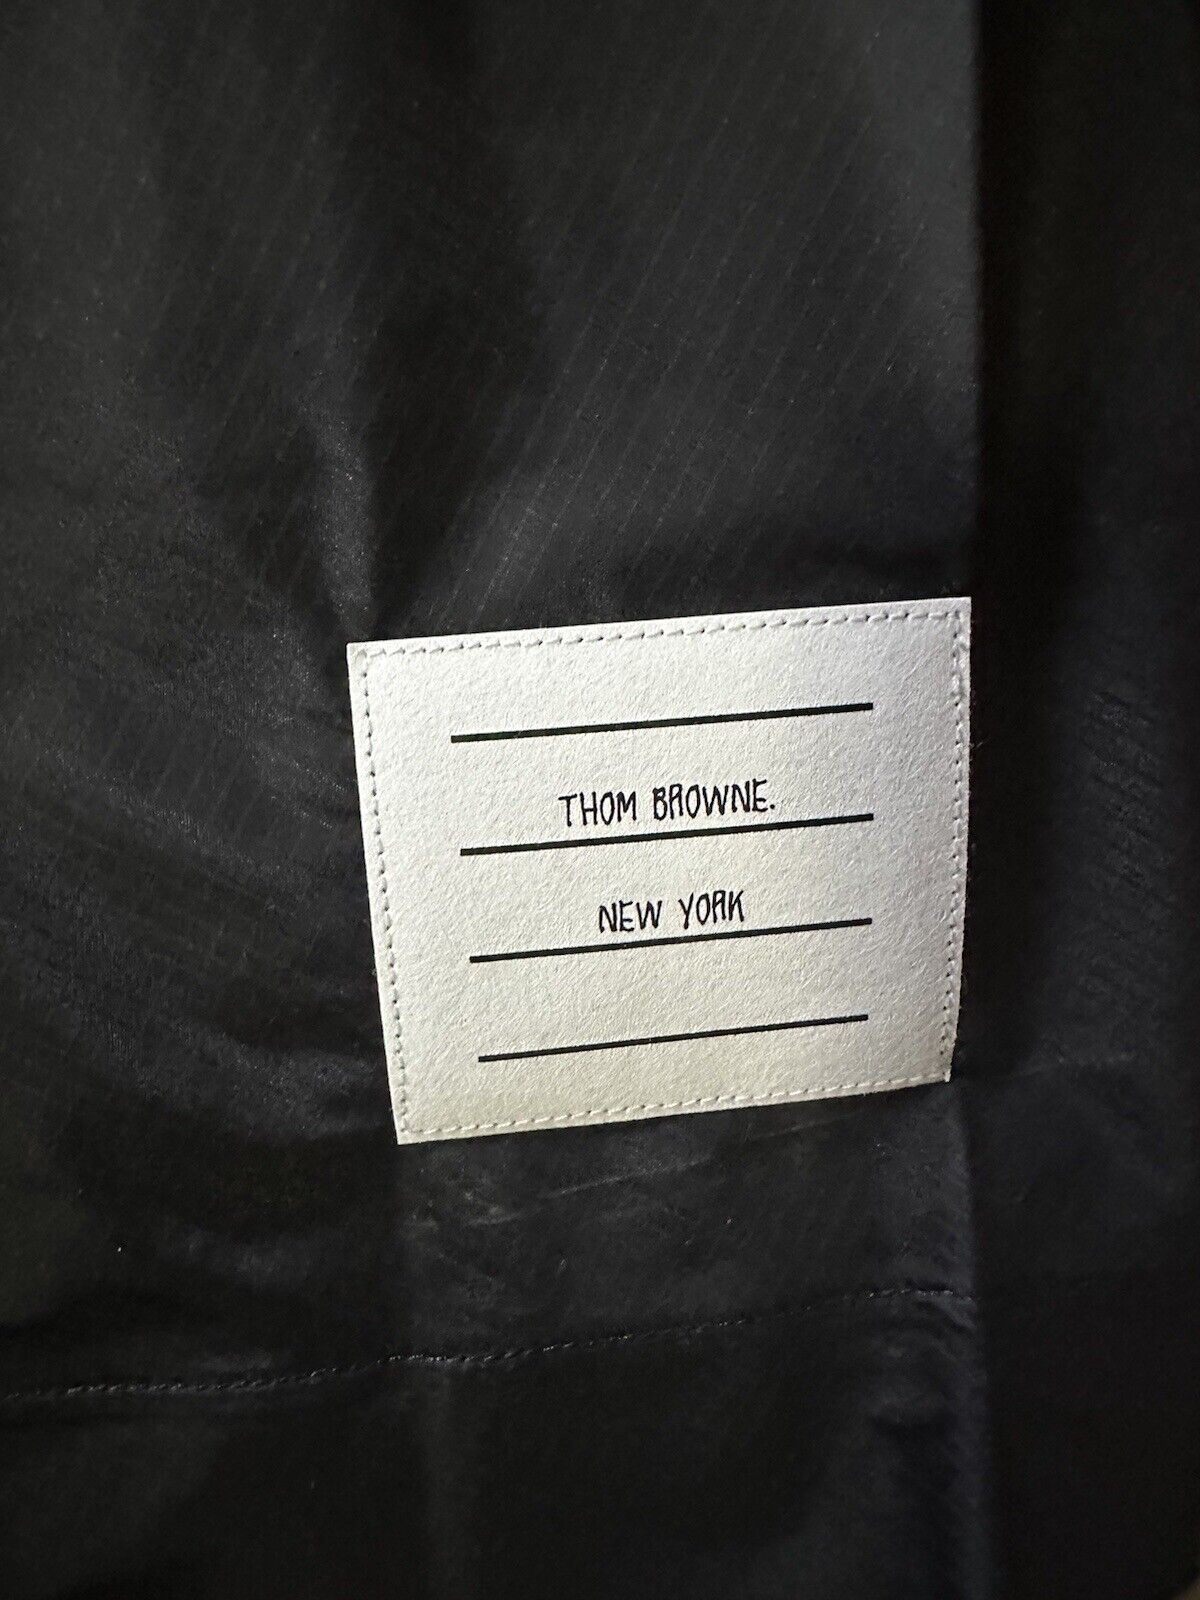 New $1200 Thom Browne Pleated Skirting A-line Dress Black Size 46/10 Italy